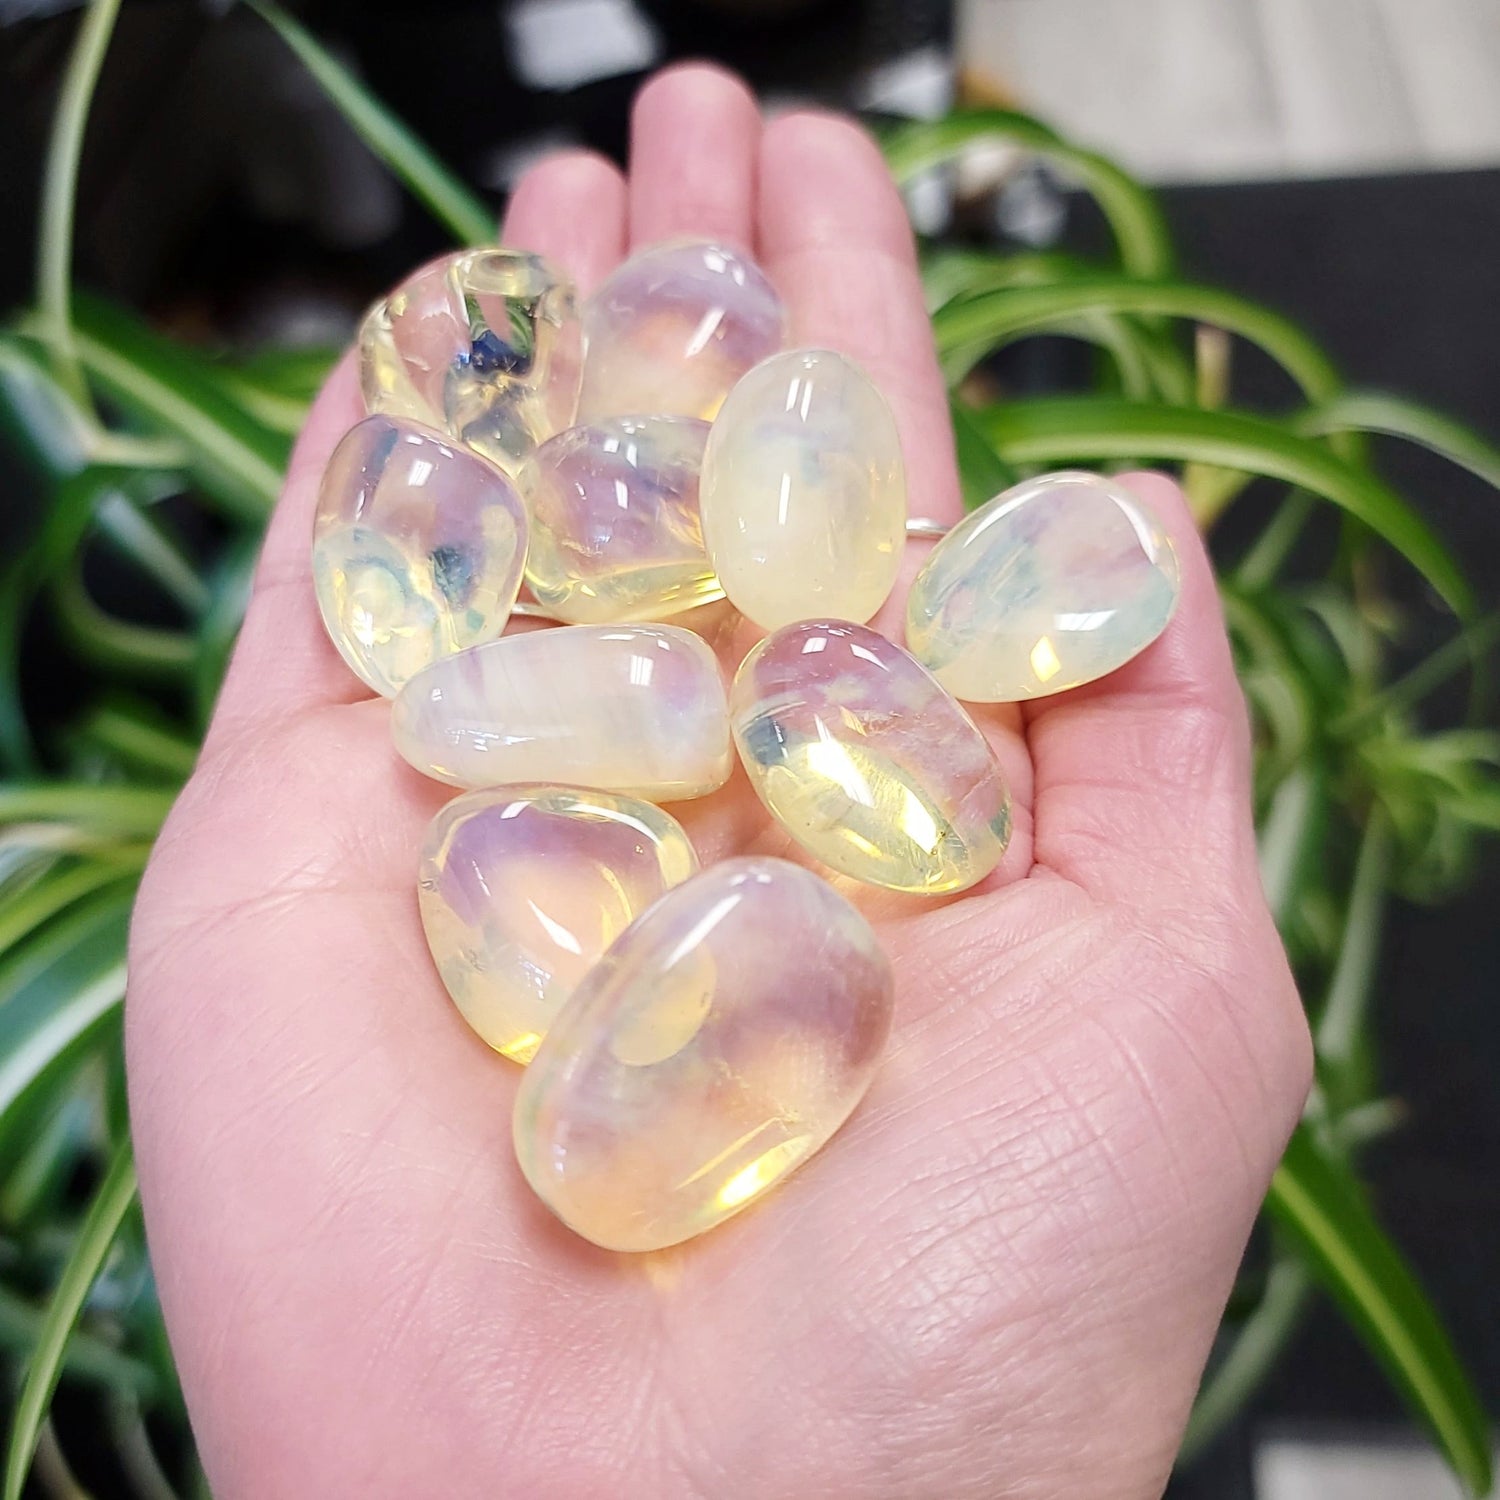 Yellow Opalite Tumbled - Elevated Metaphysical